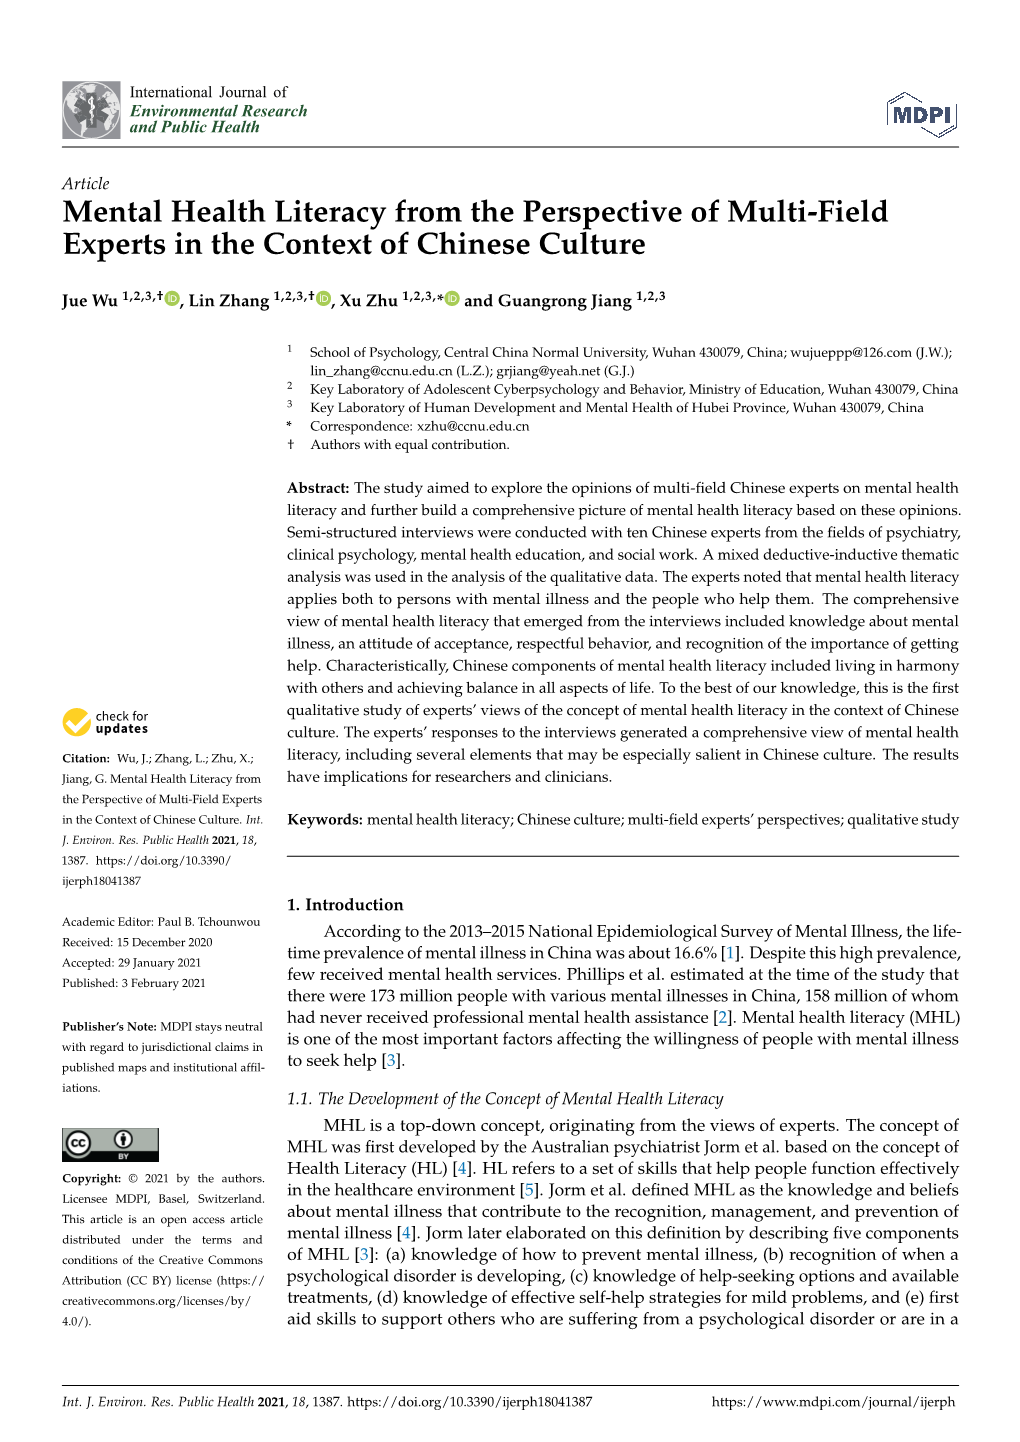 Mental Health Literacy from the Perspective of Multi-Field Experts in the Context of Chinese Culture